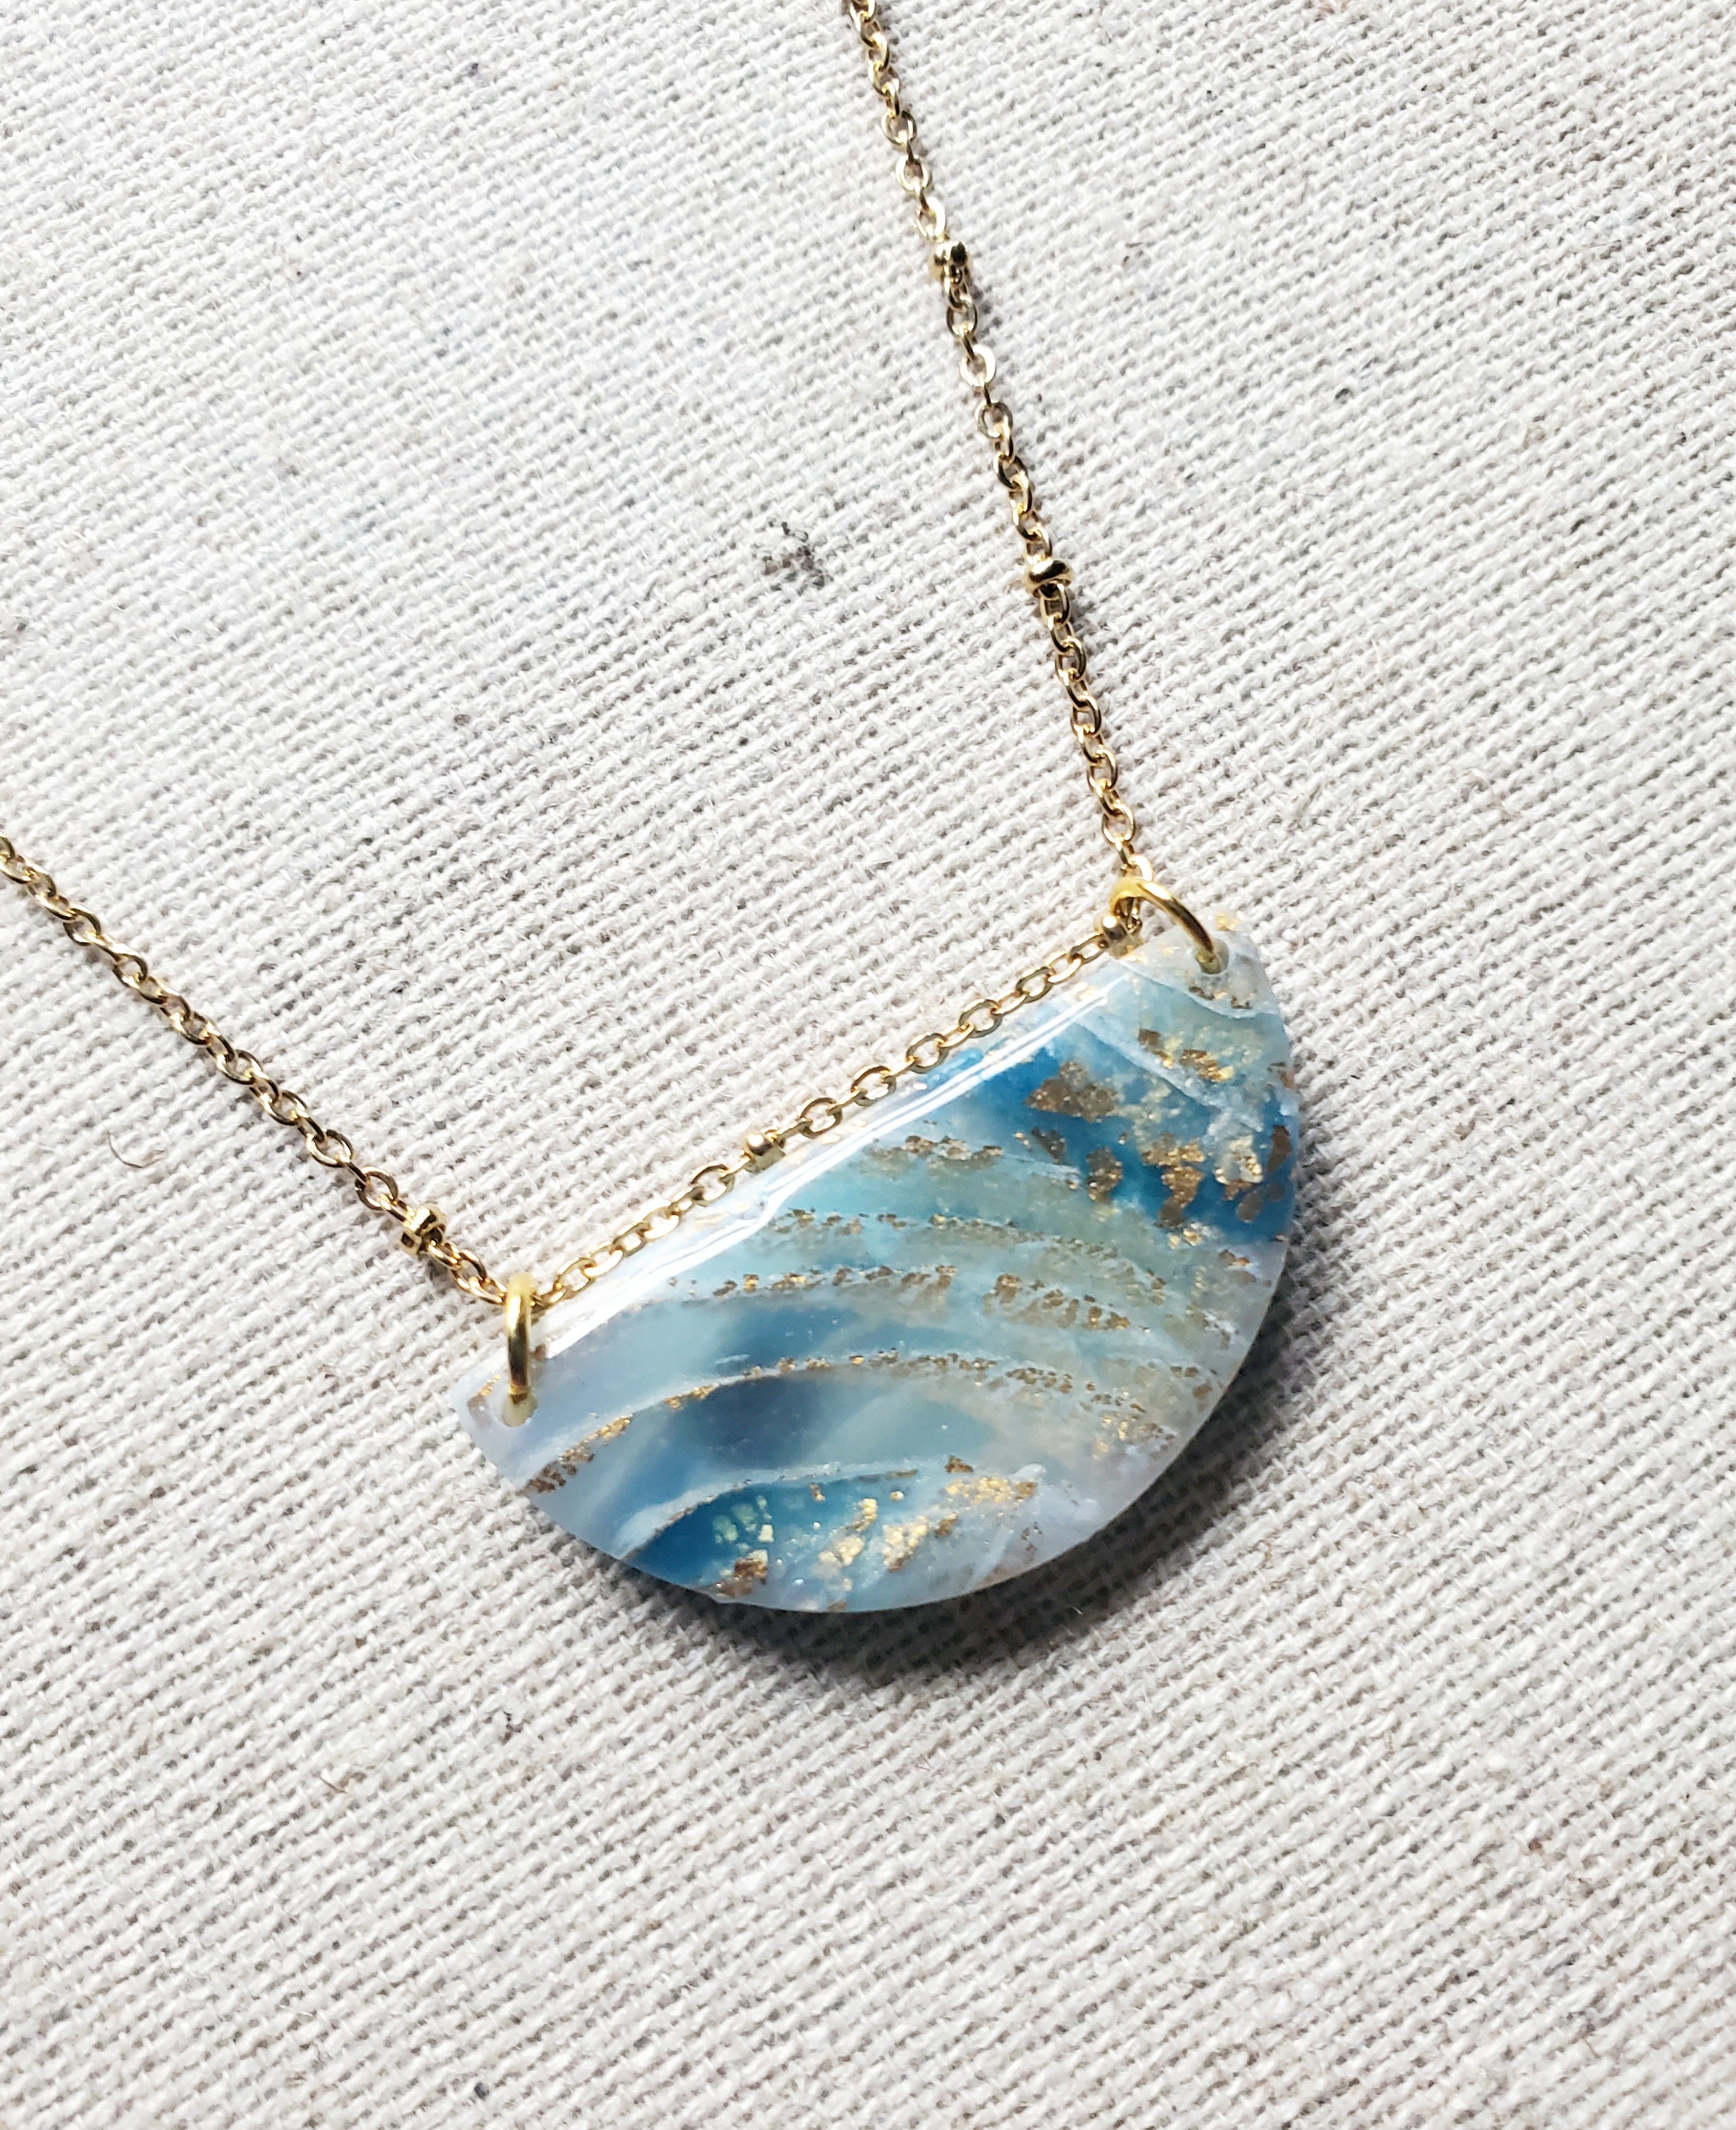 Agate Inspired Pendant Necklace